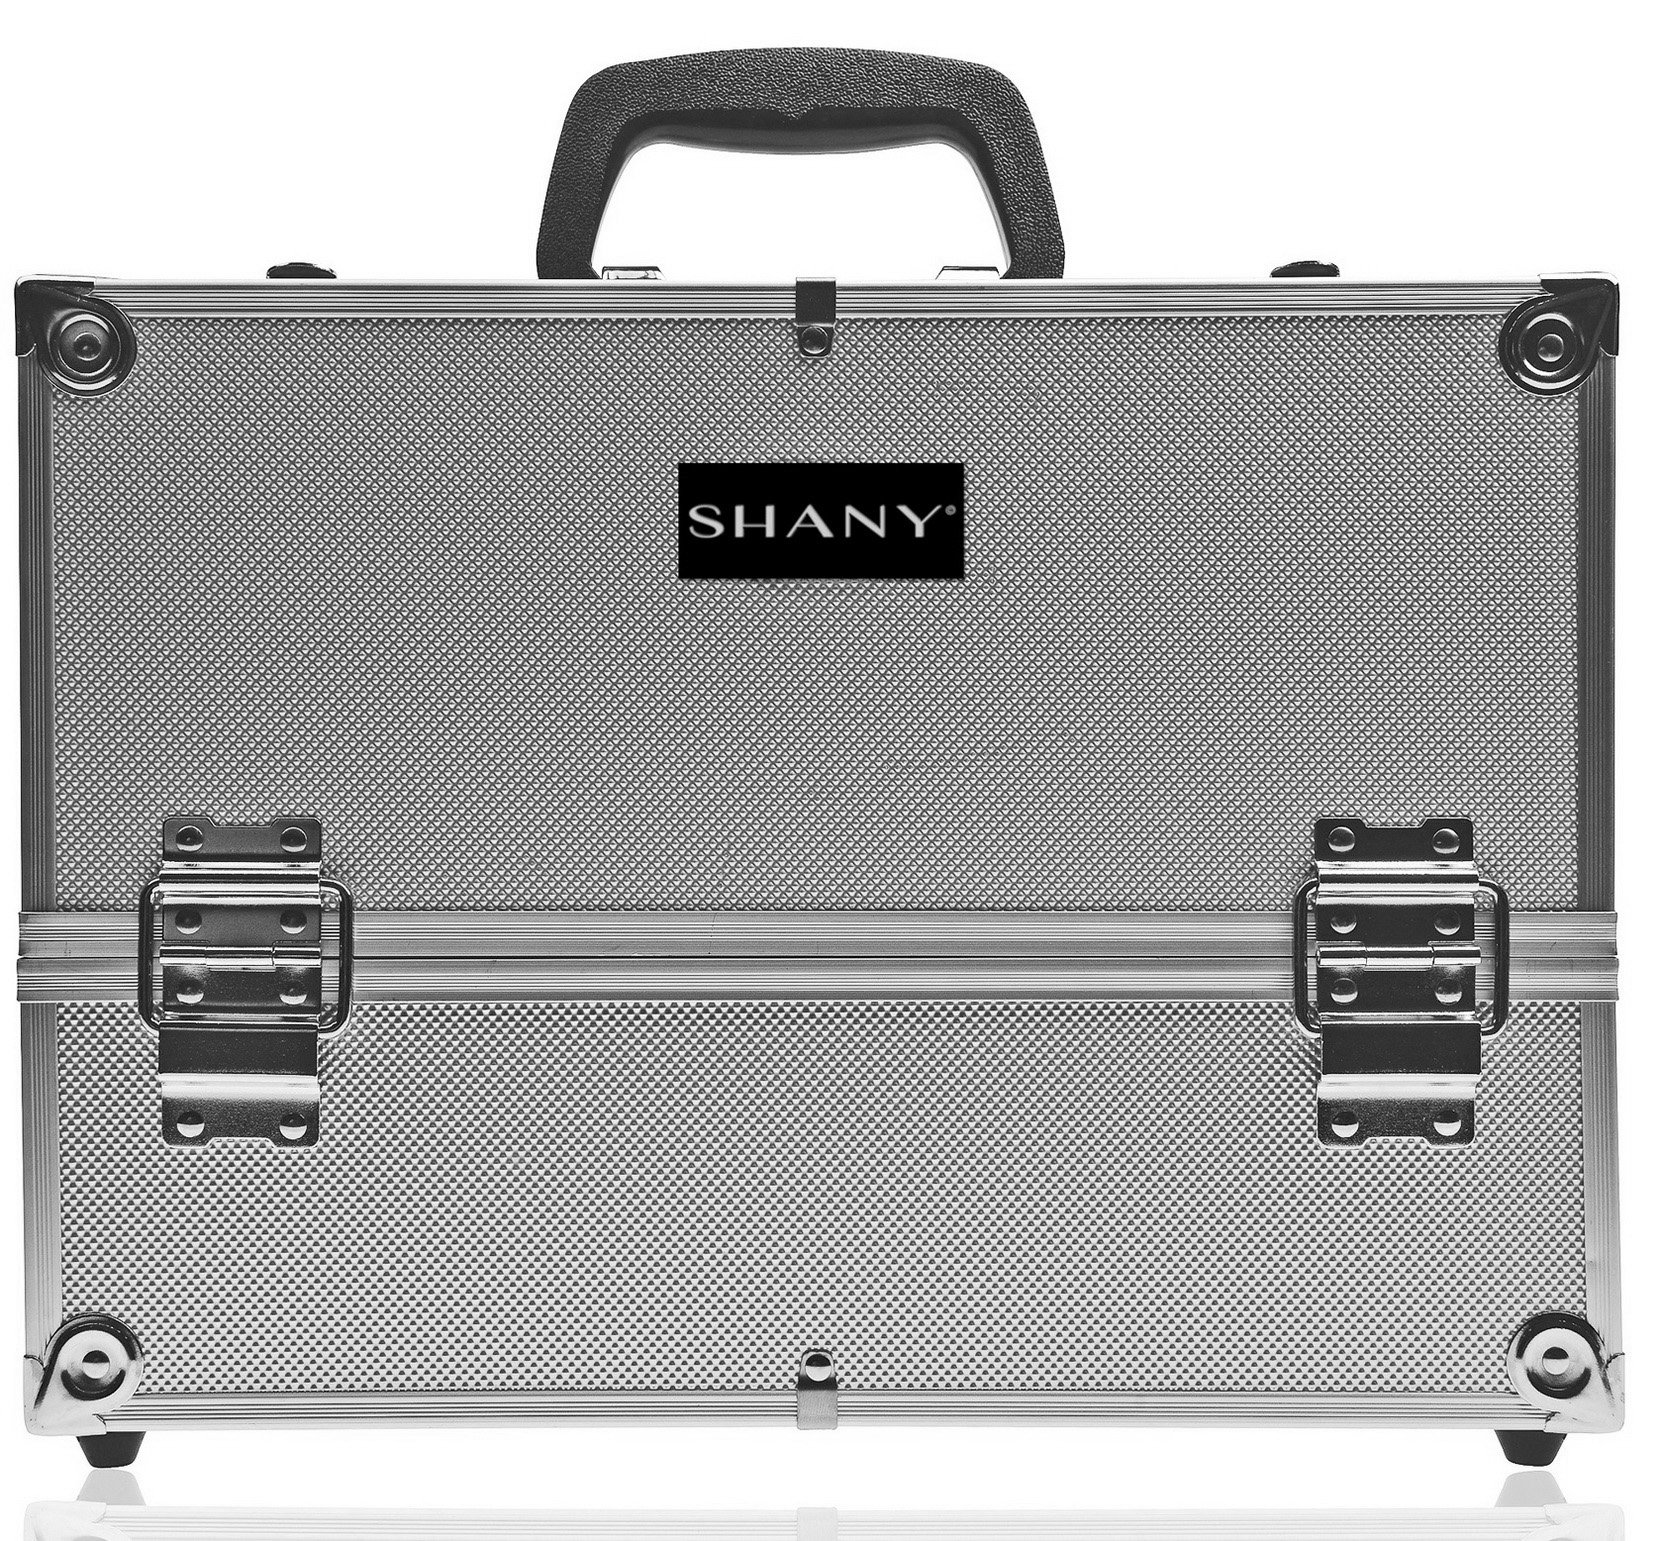 SHANY Essential Pro Makeup Train Case with Shoulder Strap and Locks - Silver